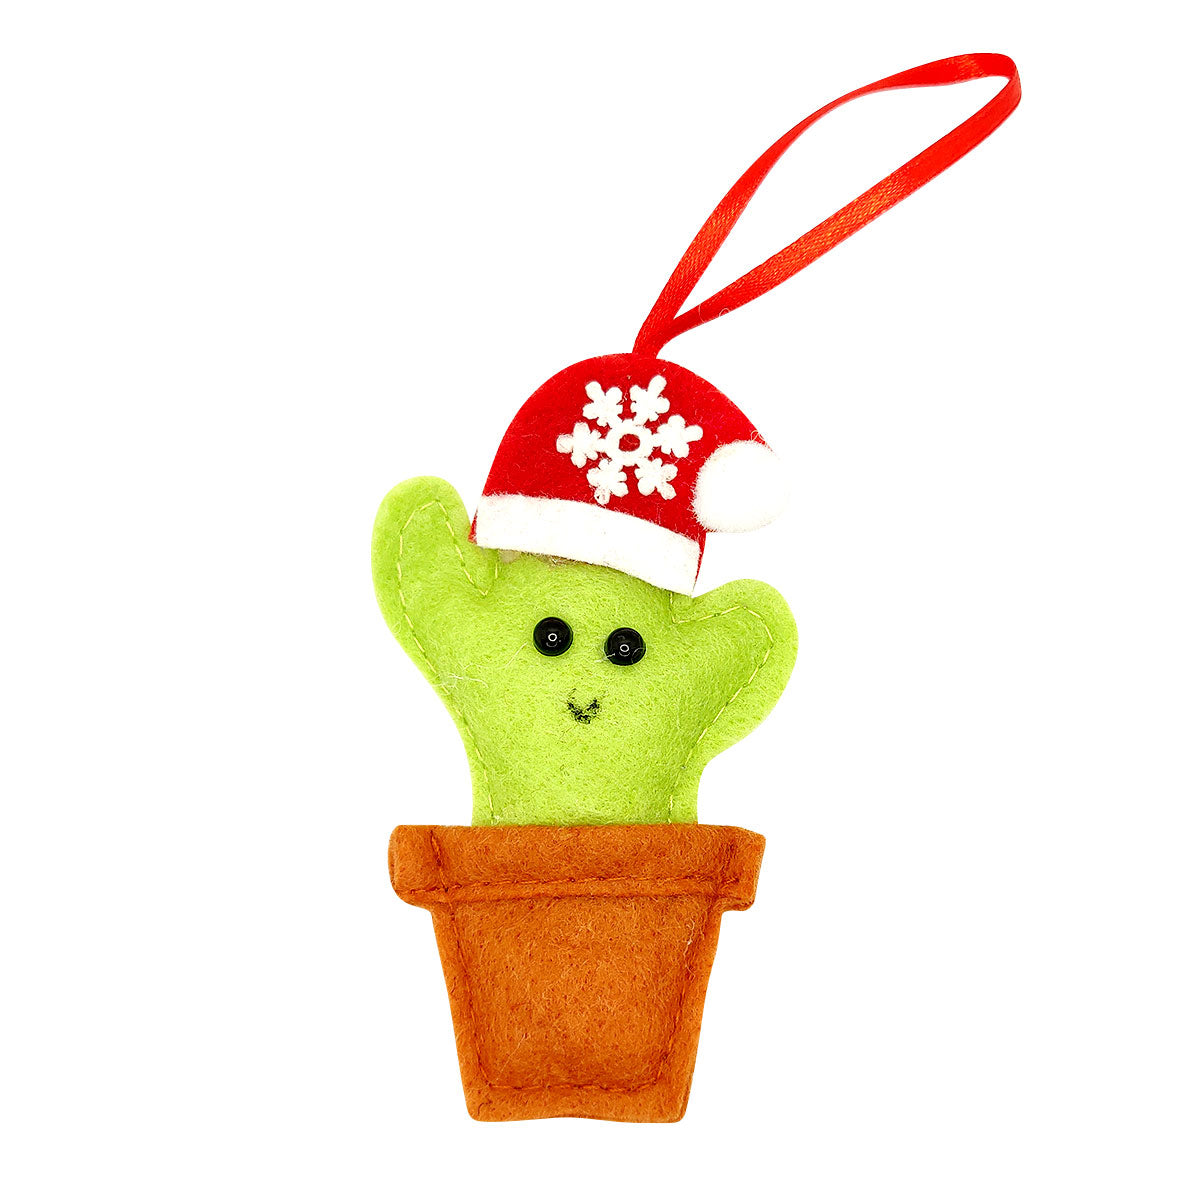 cactus, cactus succulent, succulent cactus, cacti, cactus and succulents, succulent shop, buy succulents online, Potted Cactus Ornament for Christmas Holiday, Cactus Christmas Ornament for Sale, Cactus Christmas Decorations, Christmas Succulents, Christmas Succulent Plants, Succulents for Christmas Ideas in 2021, Succulent Christmas Decorations, Succulent Christmas Gift Ideas, Christmas Gift Ideas for Succulent Lovers, Holiday Succulent Planter, Holiday Decorating with Succulents